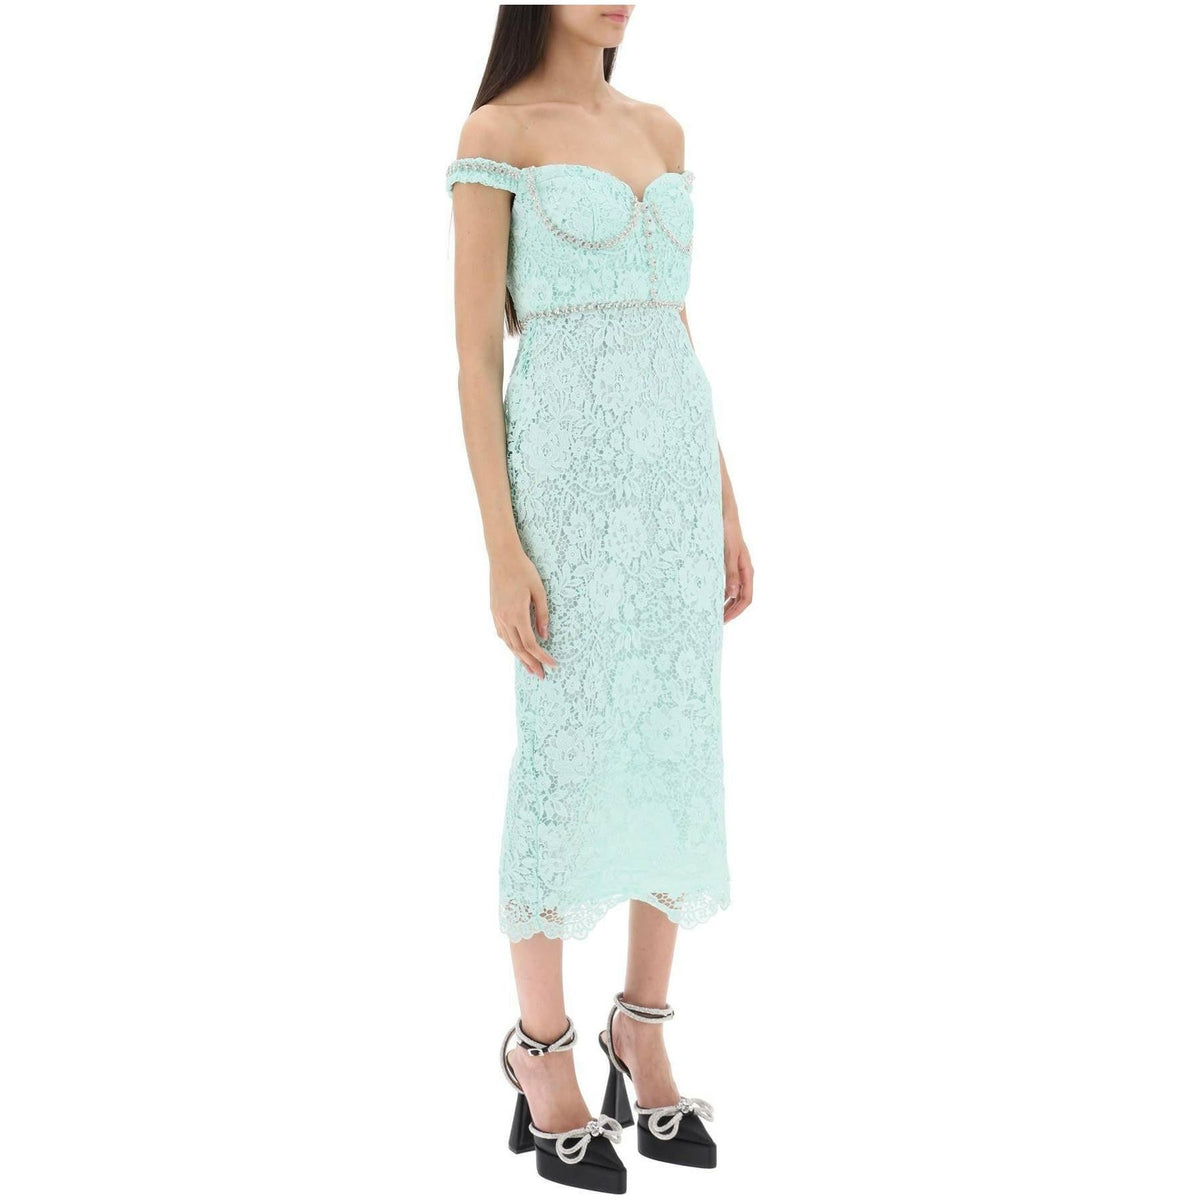 Midi Dress In Floral Lace With Crystals SELF PORTRAIT JOHN JULIA.